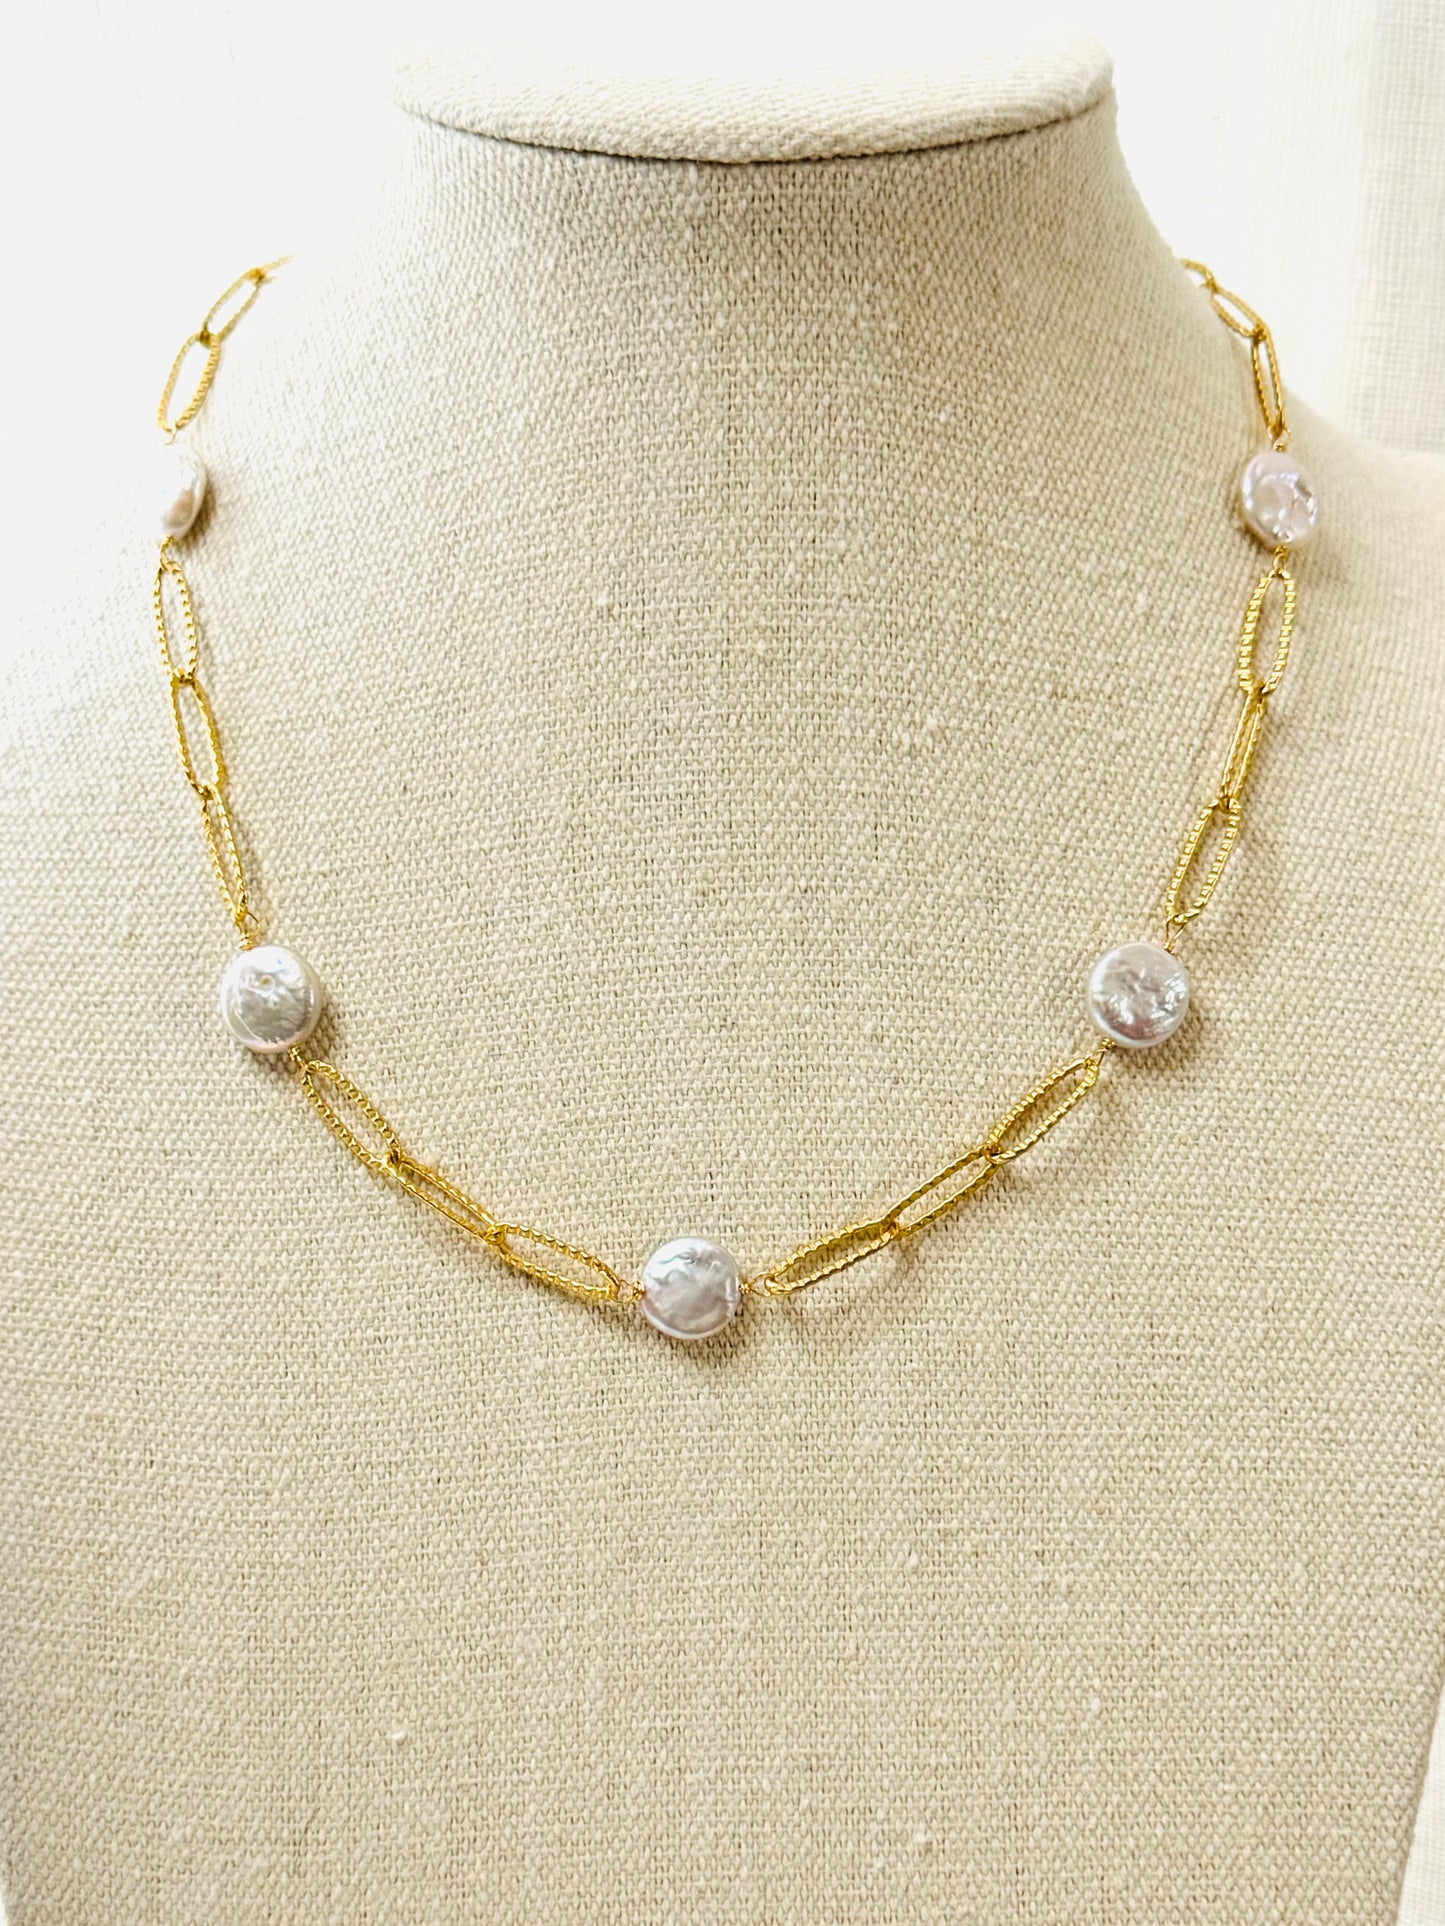 Freshwater Disc Pearl + Matte Gold Chain Necklace